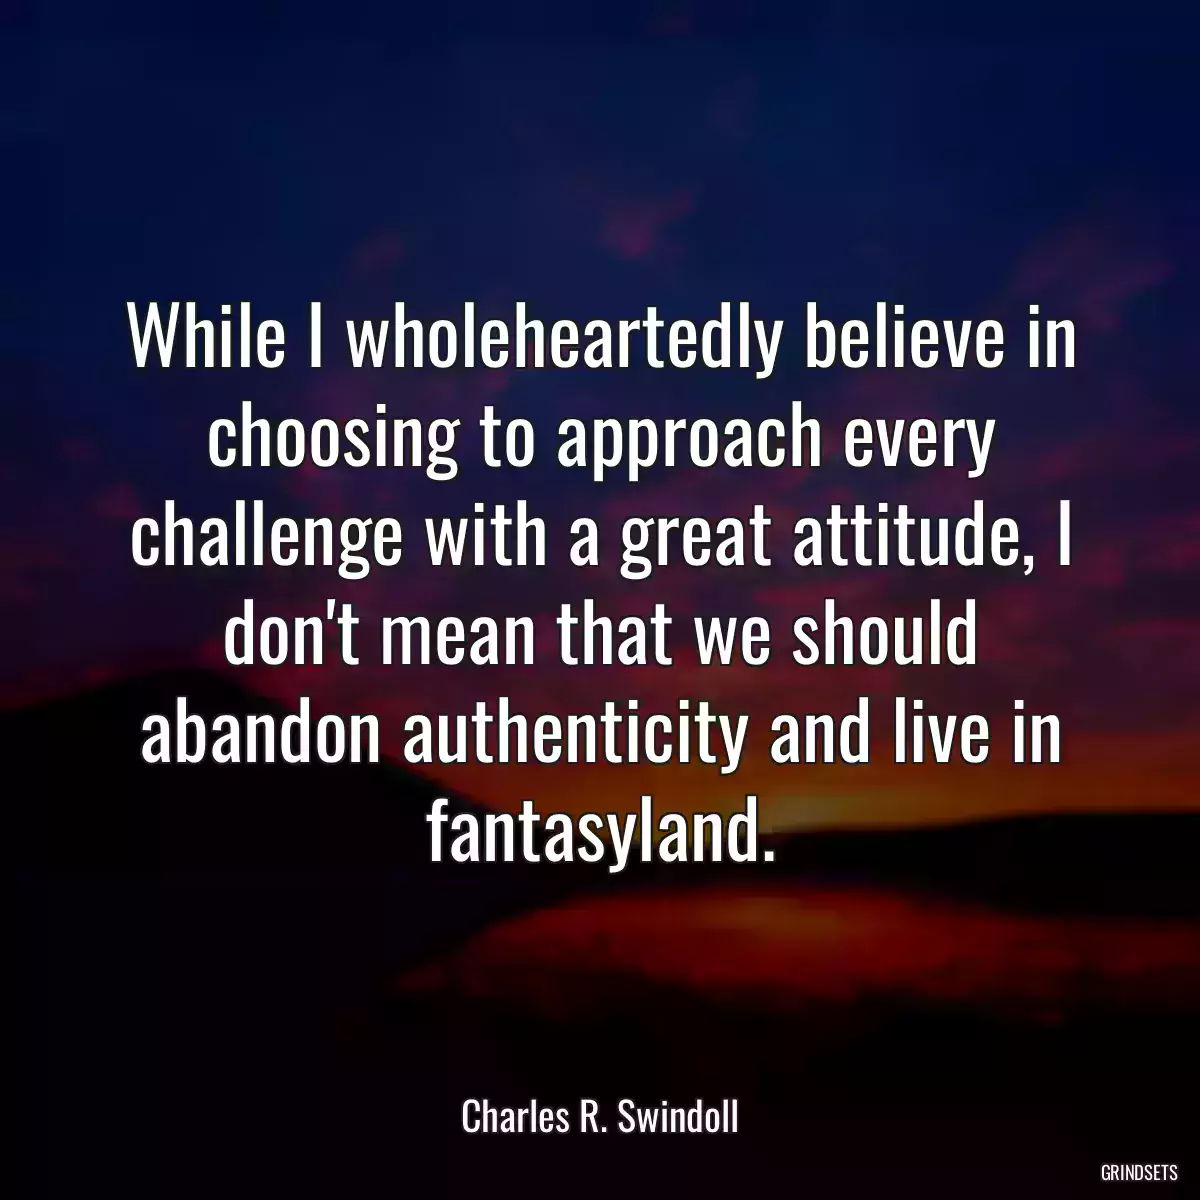 While I wholeheartedly believe in choosing to approach every challenge with a great attitude, I don\'t mean that we should abandon authenticity and live in fantasyland.